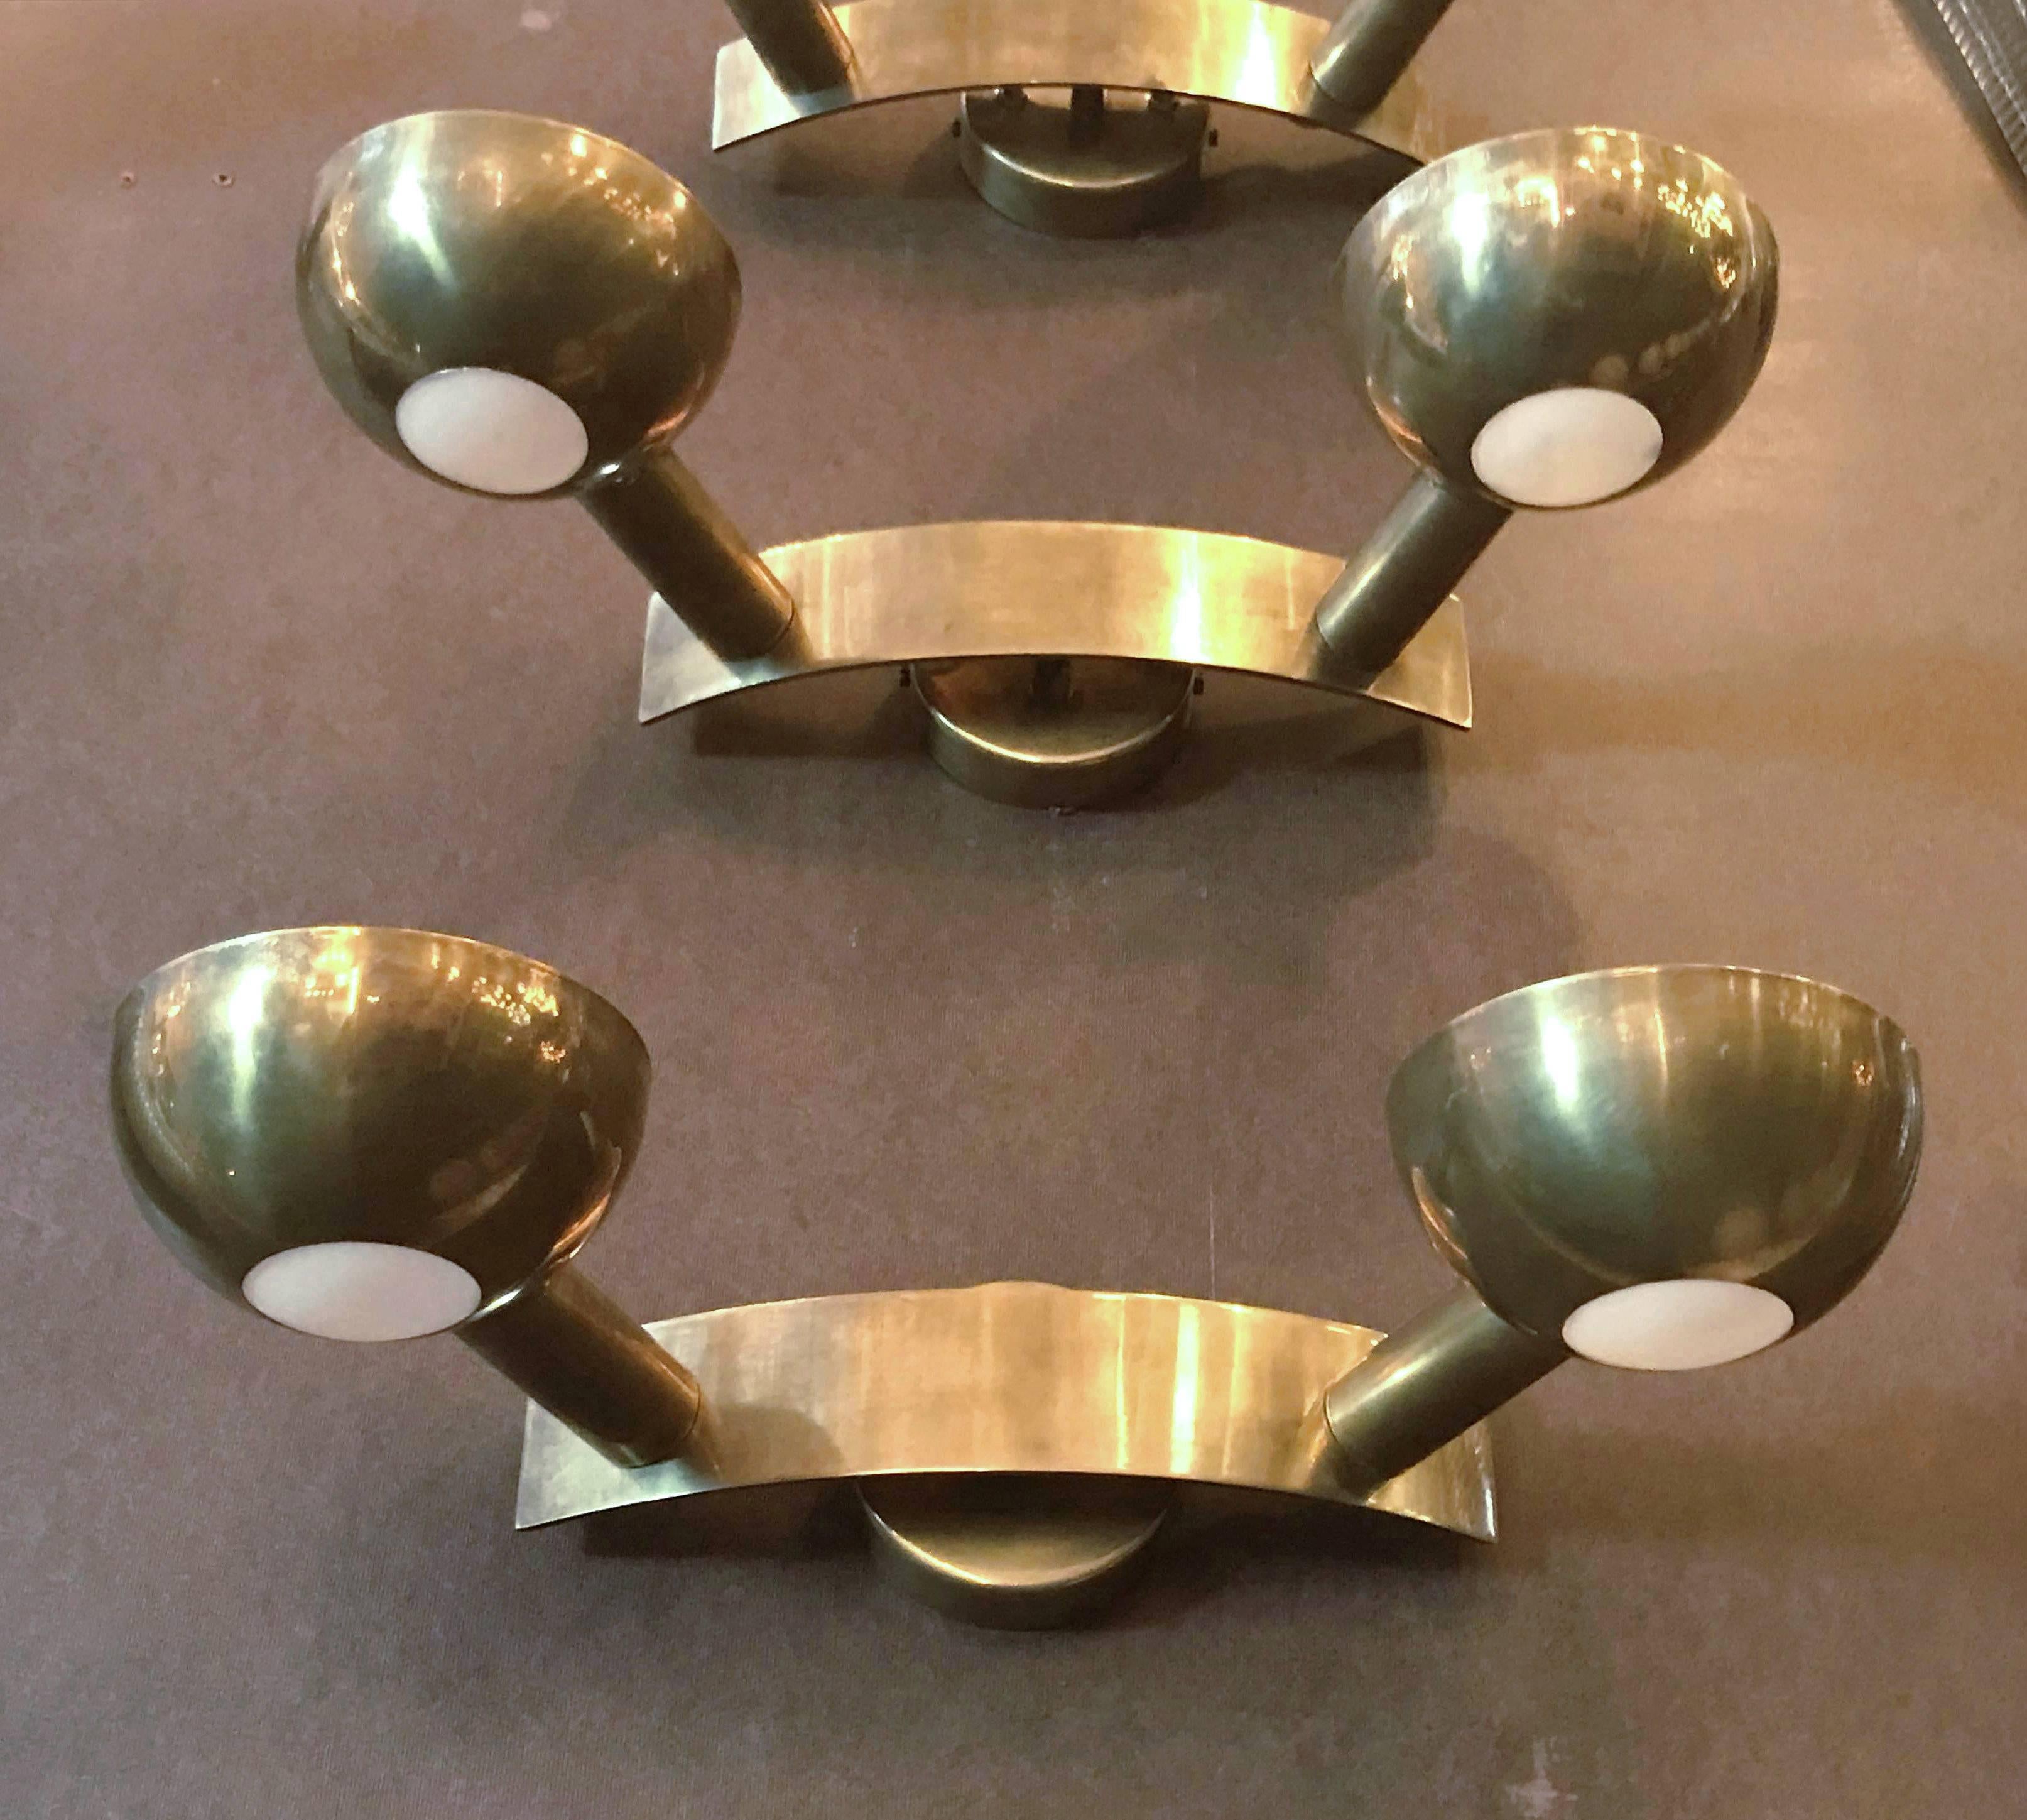 Rare vintage wall lights in iconic Minimalist design, polished brass and frosted glass lenses / Style of Stilnovo, circa 1954 / Made in Italy
2 lights / original E14 type / max 40W each
Measures: Width 16 inches / height 4 inches / depth 8